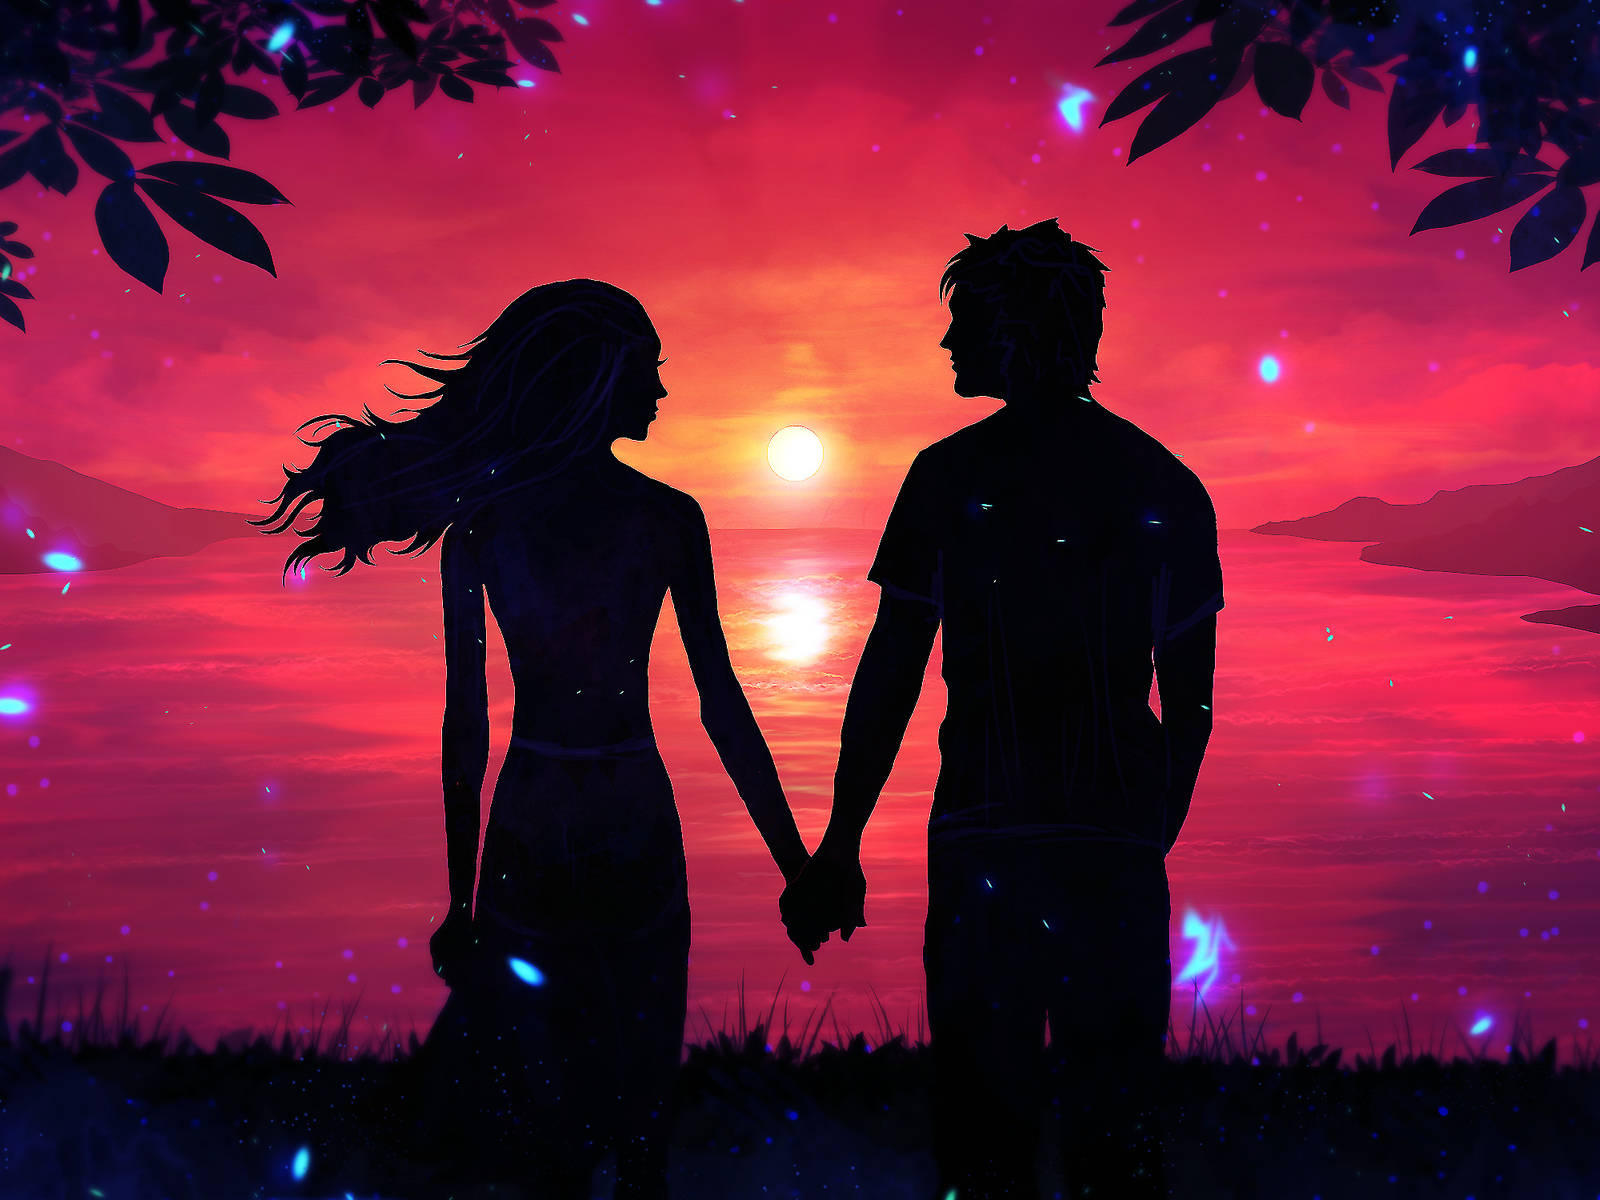 Holding Hands While Facing Sunset Silhouette Digital Art Wallpaper